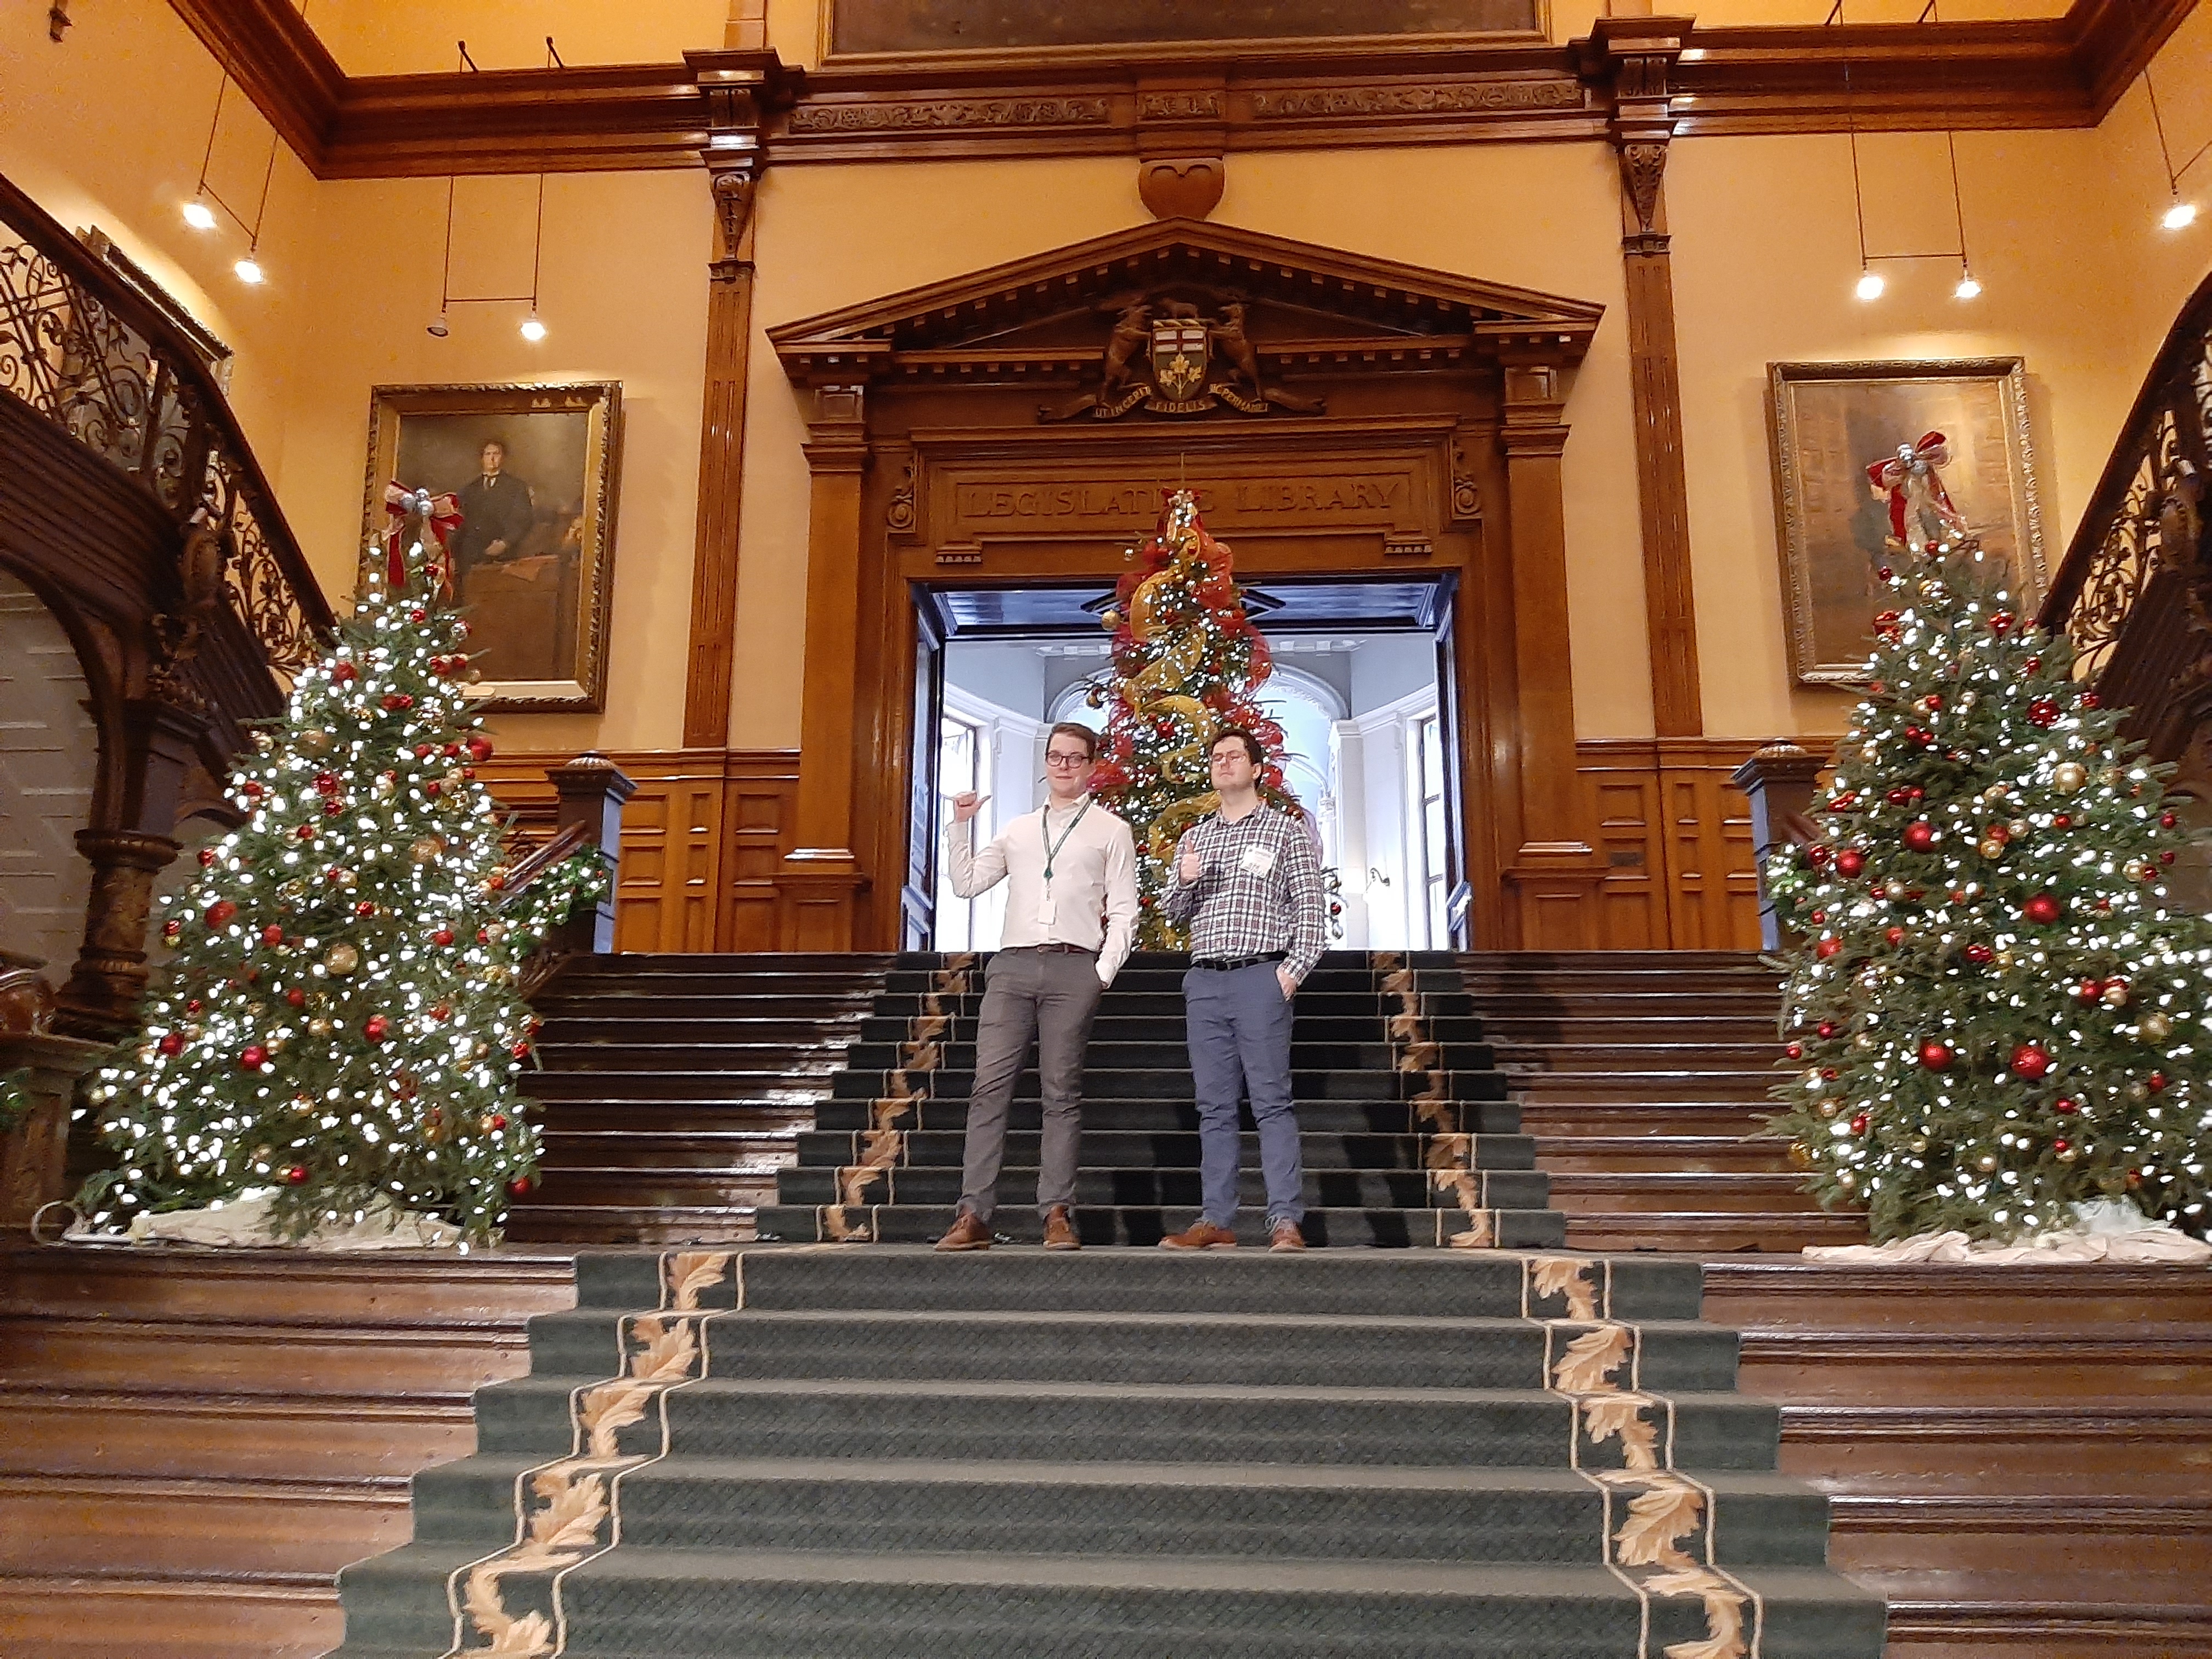 Ranking the leaders' 2019 Queen's Park Christmas trees